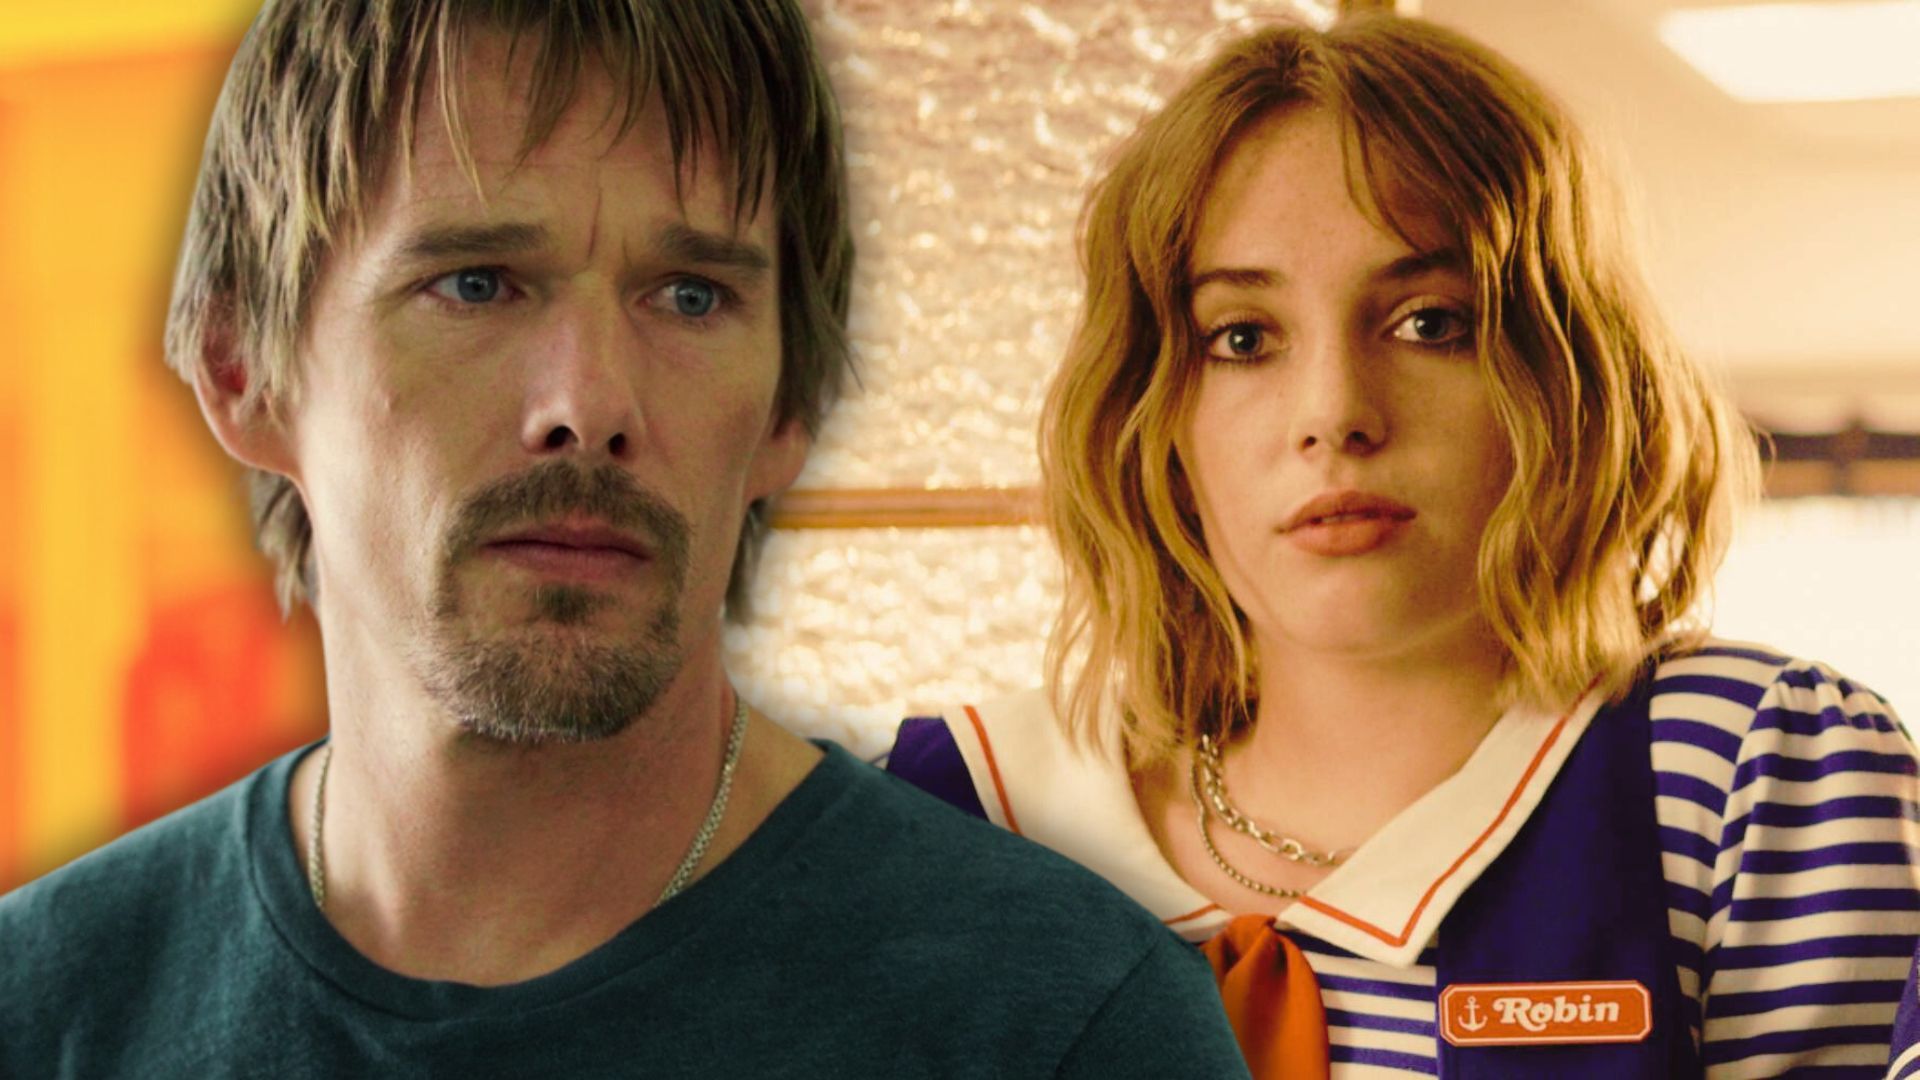 Maya Hawke Acknowledges Nepotism Influenced Her Casting in Quentin Tarantino Movie